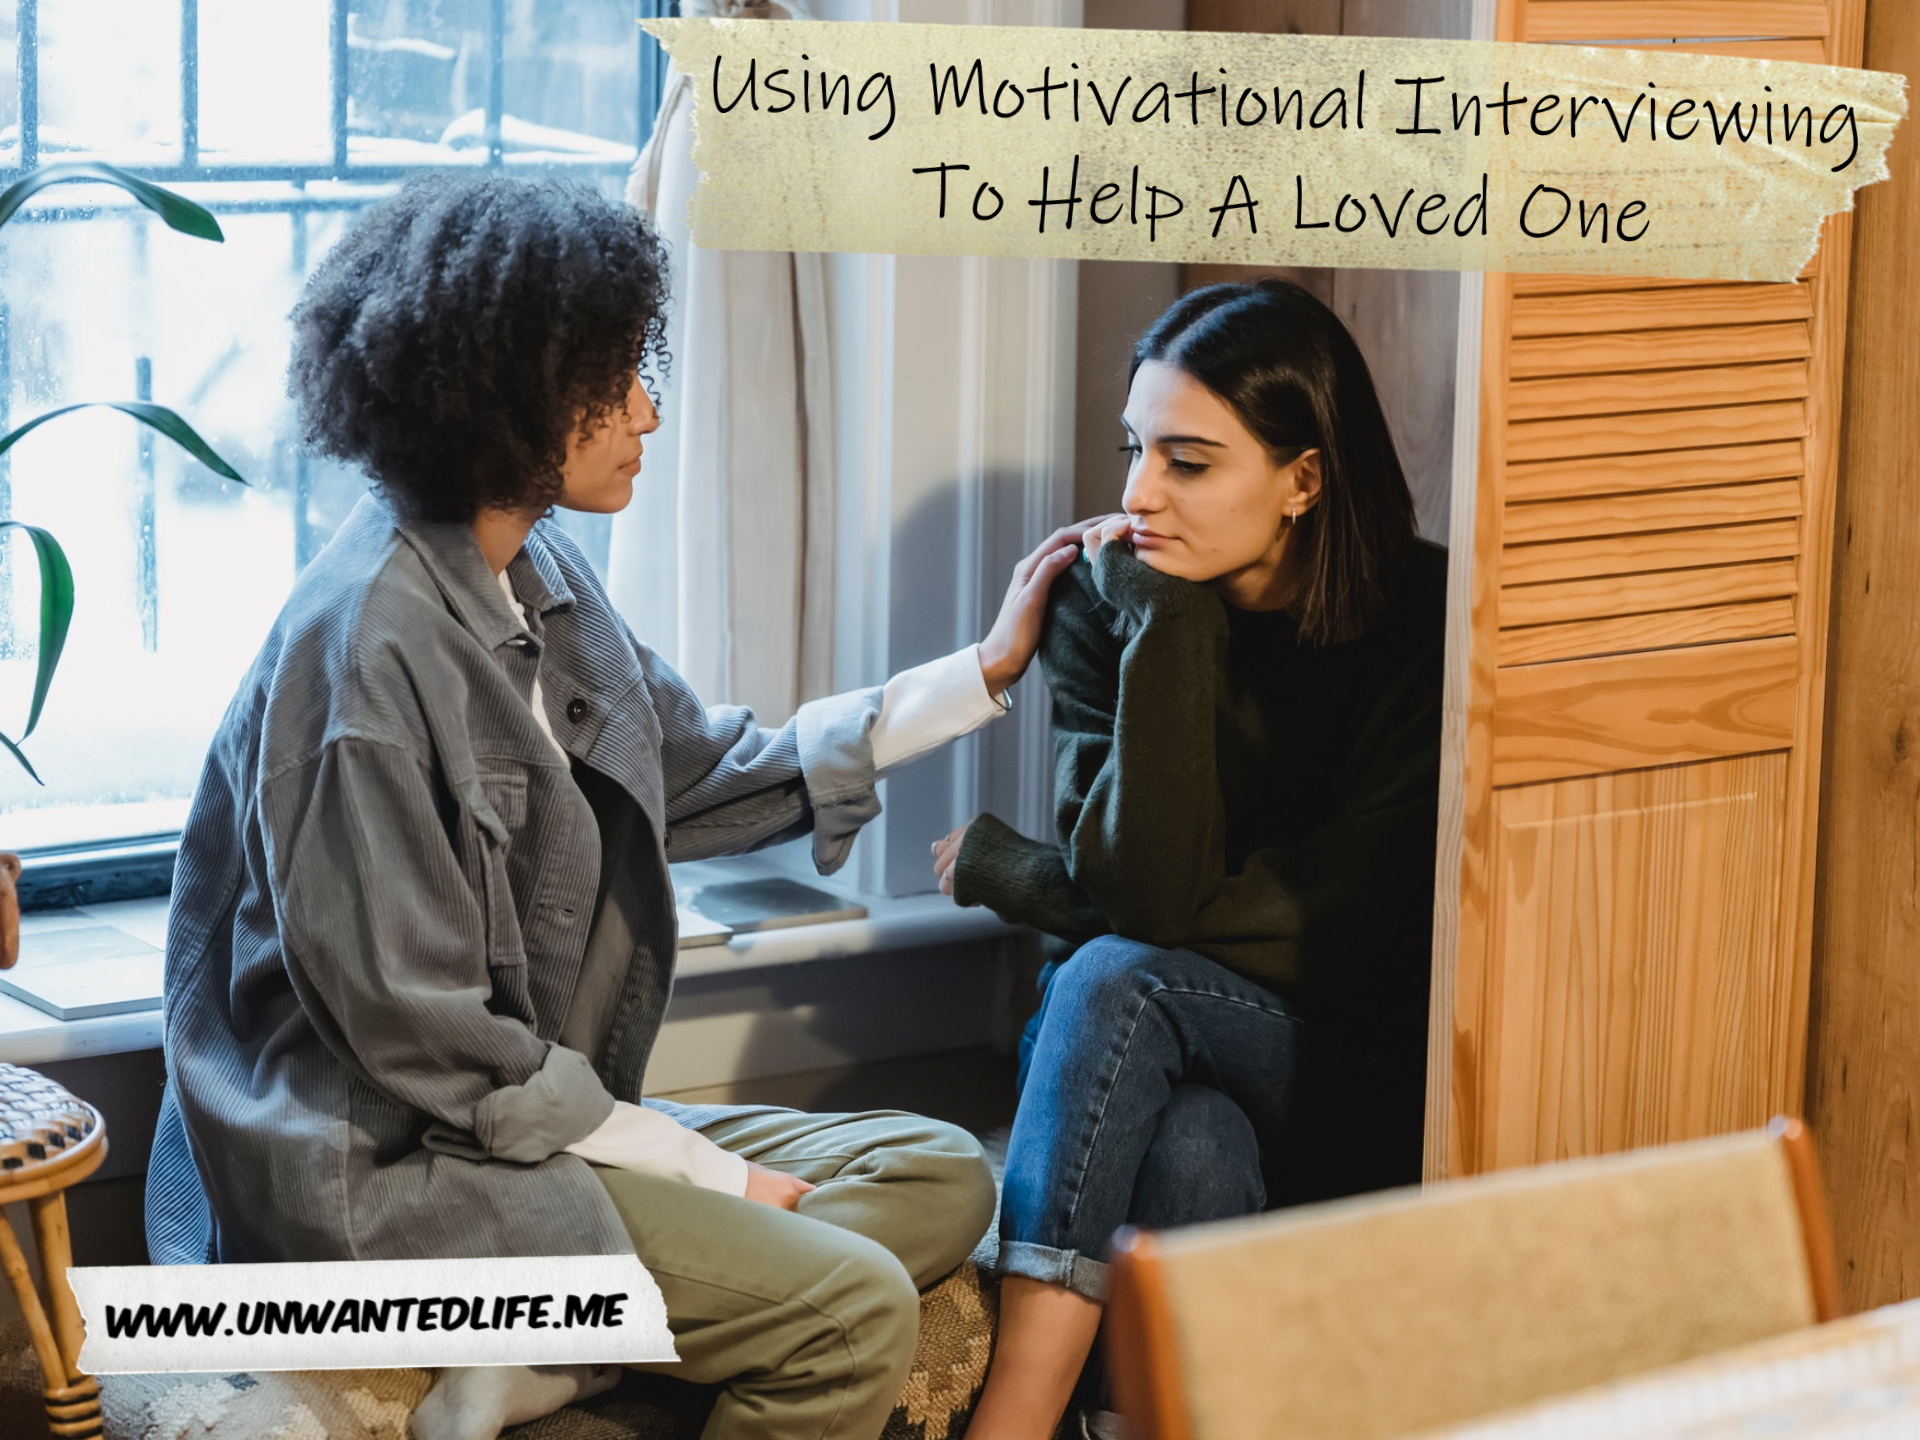 A photo of a mixed ethnicity Black woman sitting and supporting their White female friend to represent the topic of the article - Using Motivational Interviewing To Help A Loved One